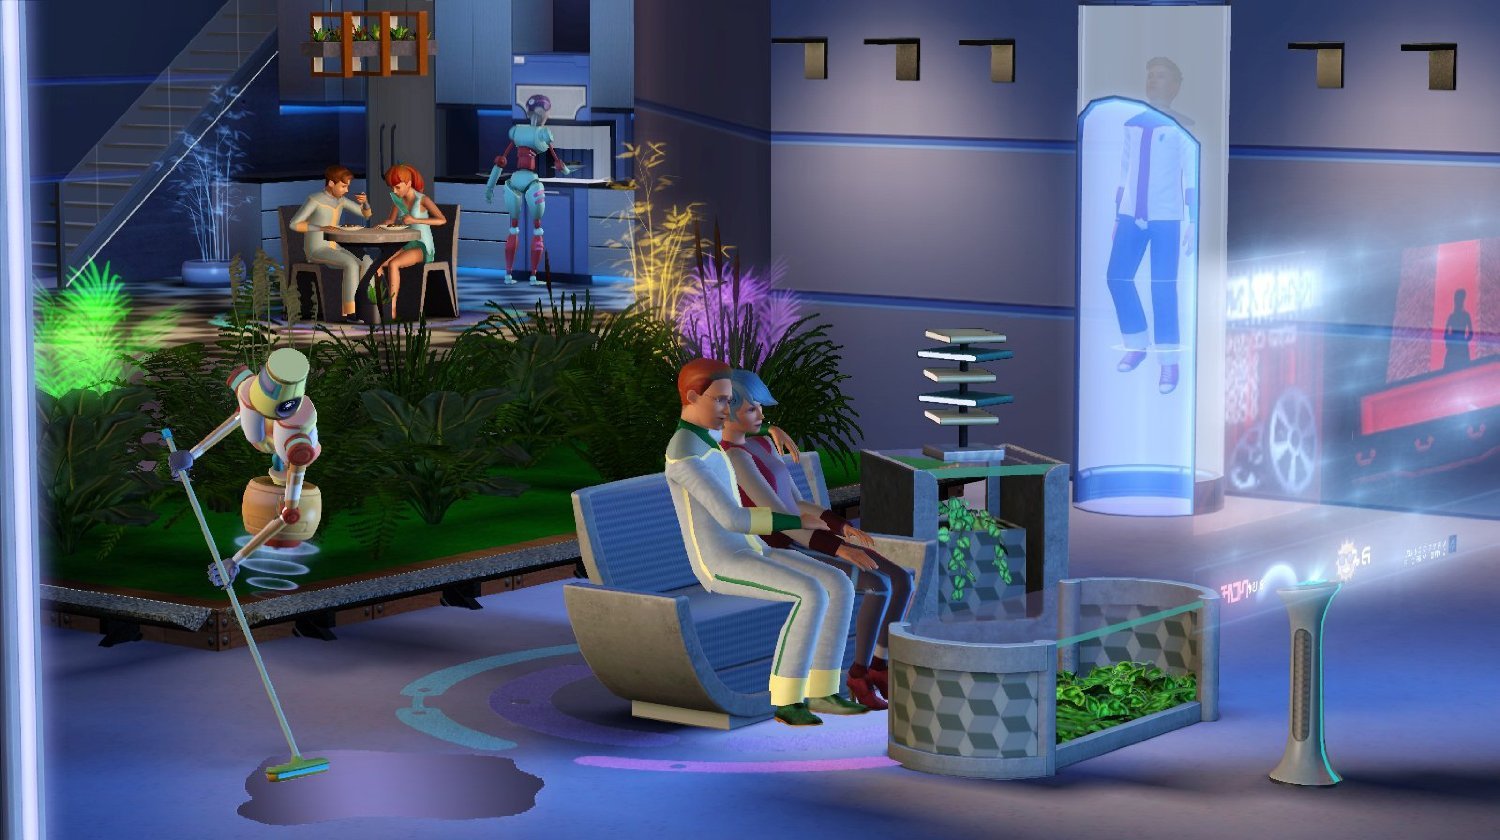 the sims 3 into the future free download